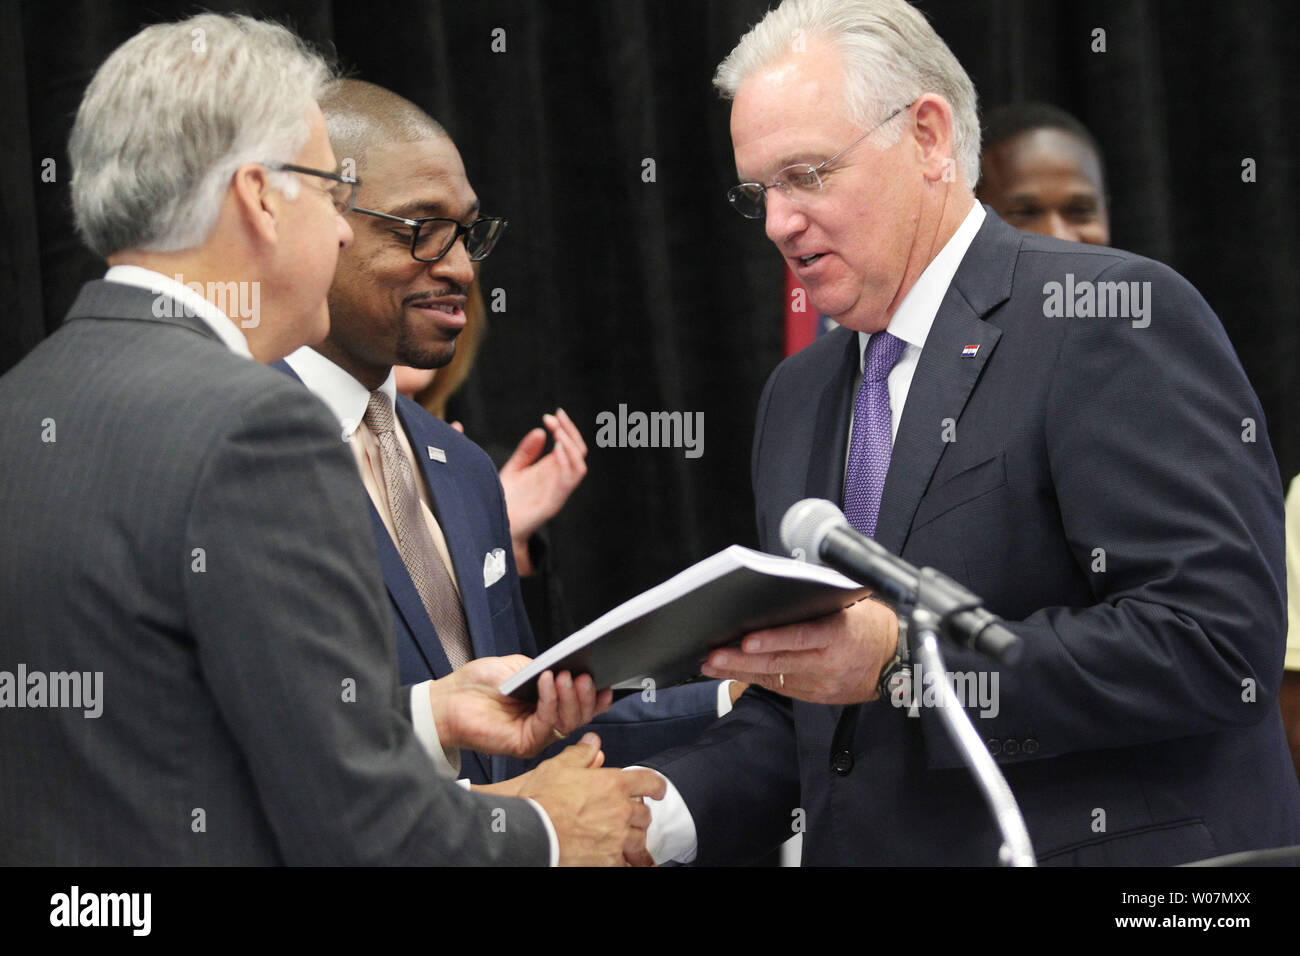 Missouri Governor Jay Nixon (R) accepts a copy of the Ferguson Commission's recomendations from co-chairs Rich McClure (L) and Rev. Starsky Wilson during a press conference in Florissant, Missouri on September 14, 2015. The Ferguson Commission was assembled by the Governor last November to discuss and recommend changes following the volence and looting that occured in Ferguson, Missouri following the shooting death of Michael Brown by white Ferguson police officer Darren Wilson.    Photo by Bill Greenblatt/UPI Stock Photo